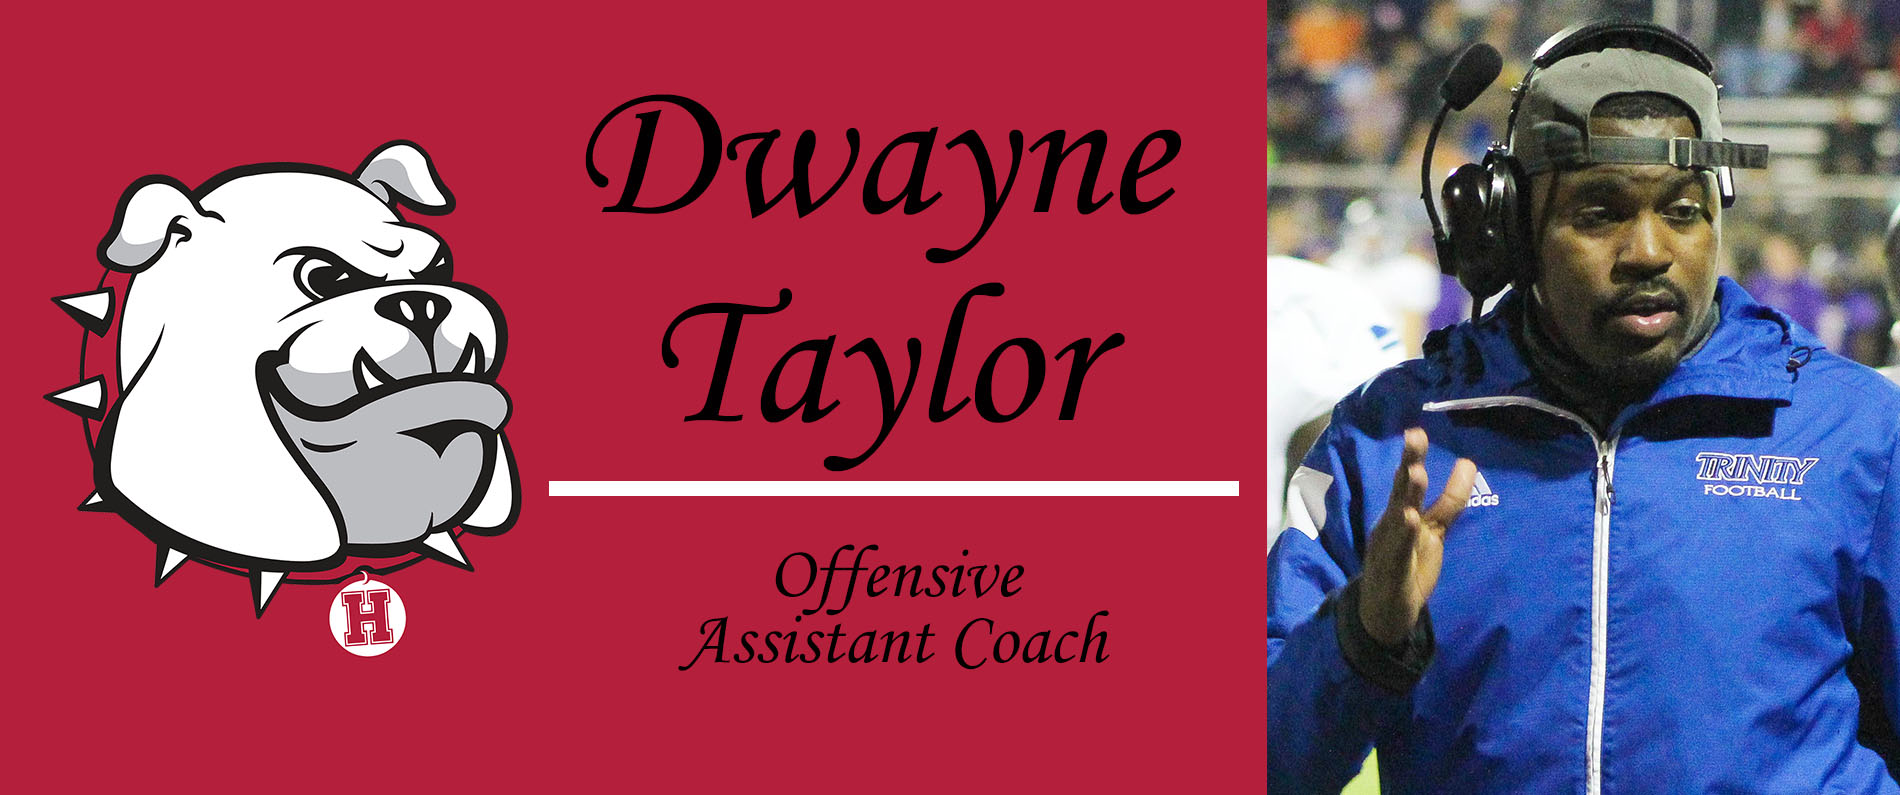 Taylor named offensive assistant football coach